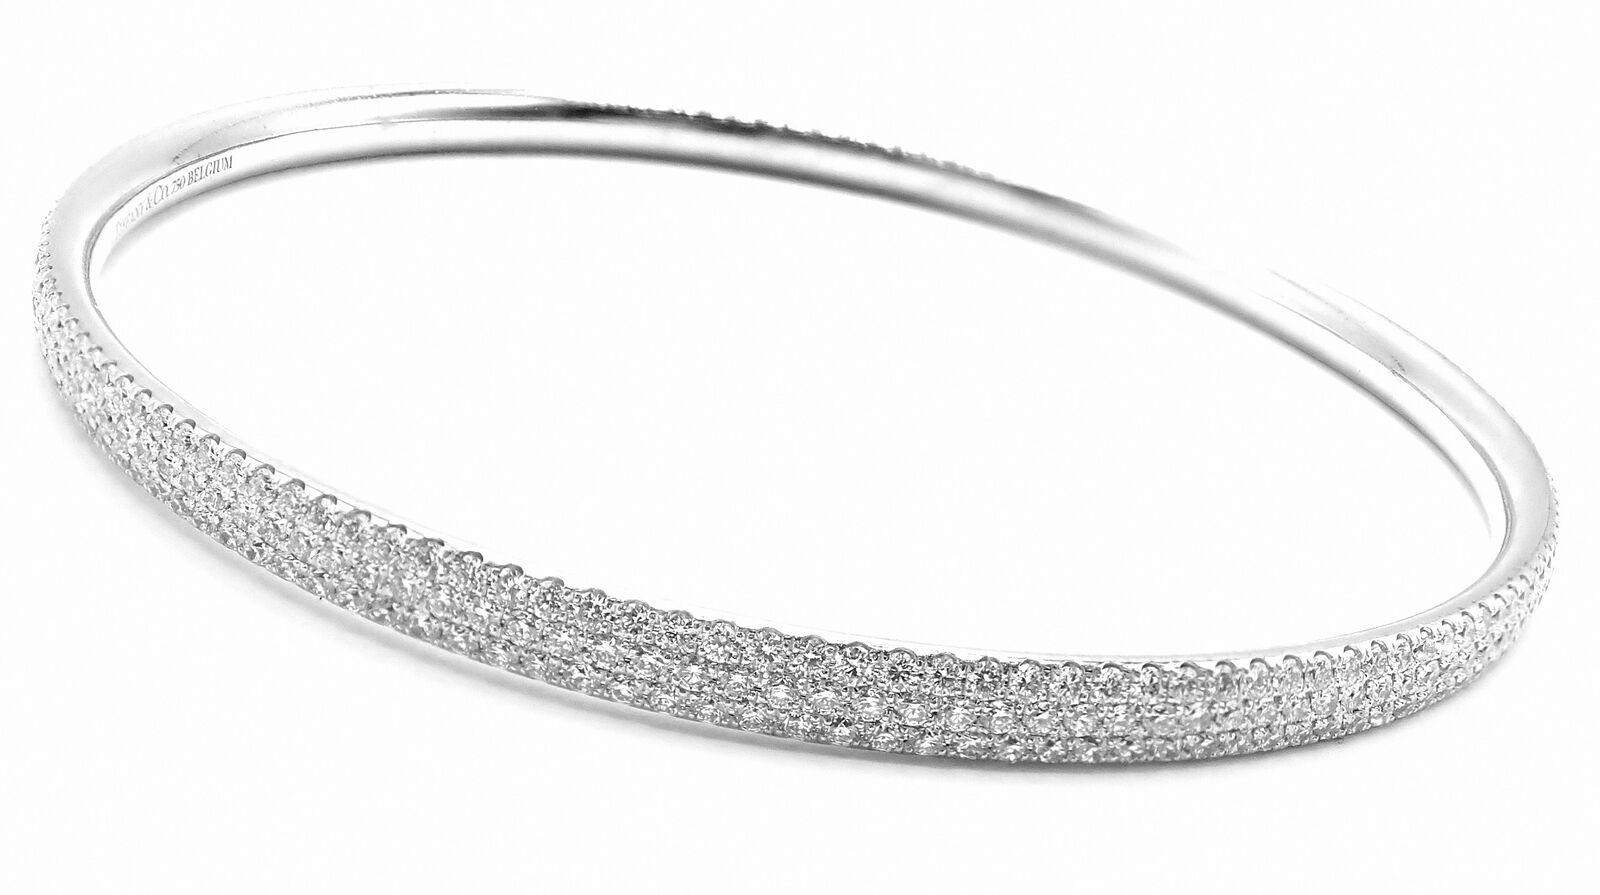 18k White Gold Full Diamond Three-Row Slip On Metro Bangle Bracelet by Tiffany & Co. 
With Round Brilliant Cut Diamonds VS1 clarity, G color 2.98ct
This gorgeous bracelet come with an original Tiffany & Co box.
Details: 
Size: Medium 6.25